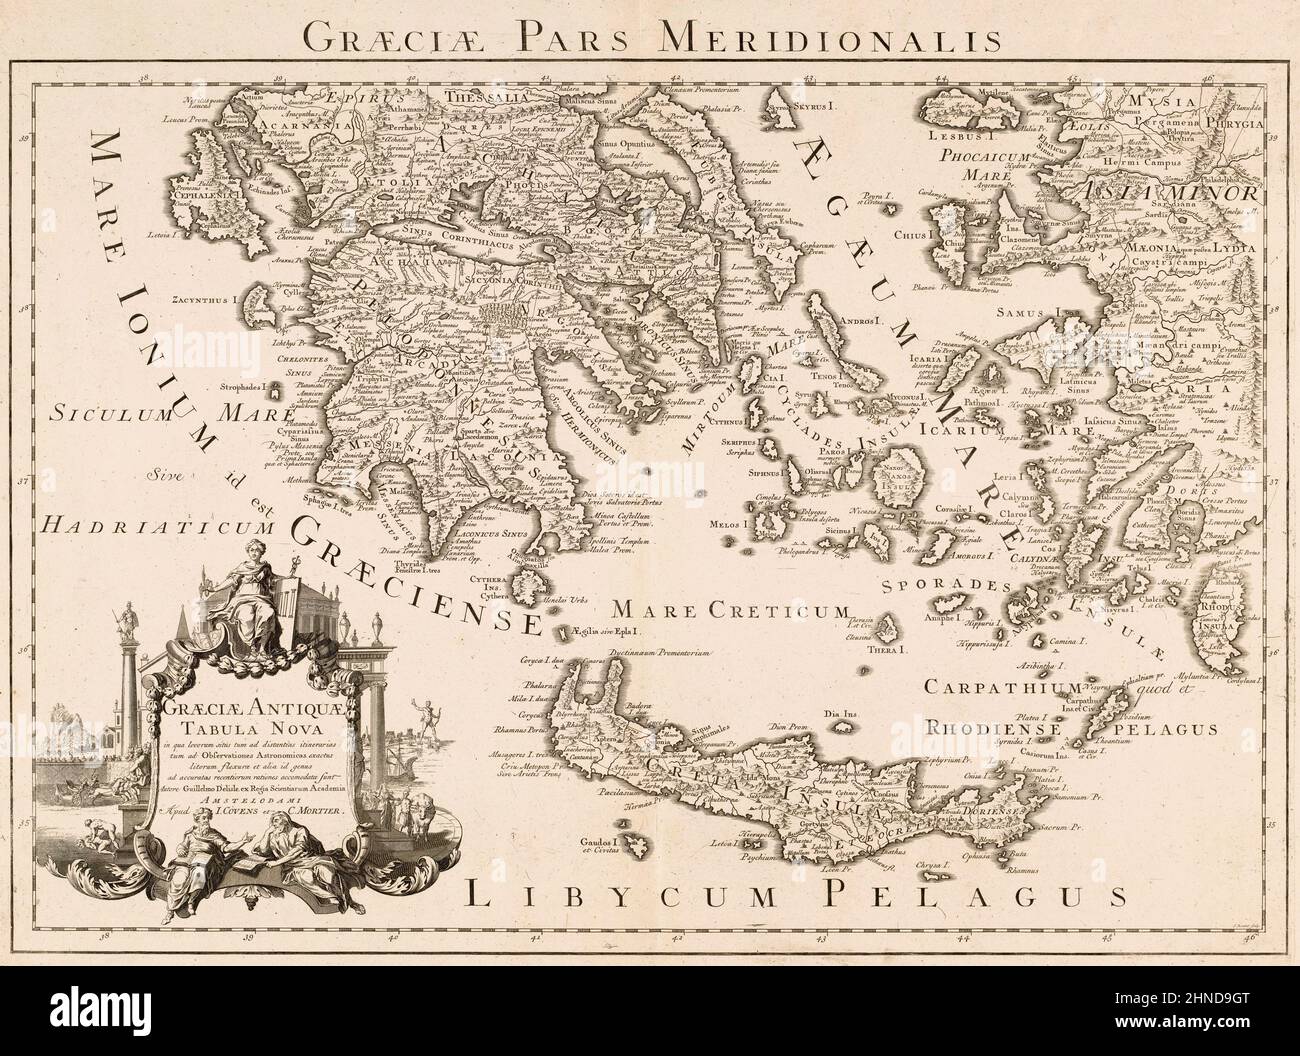 Graeciae pars meridionalis. Graeciae antiquae tabula nova.  Southern Greece.  A New Map of Ancient Greece.  Parts of Asian Turkey are also shown. After a map by French cartographer Guillaume Delisle, also spelled Guillaume de l'Isle, 1675 - 1726. Stock Photo